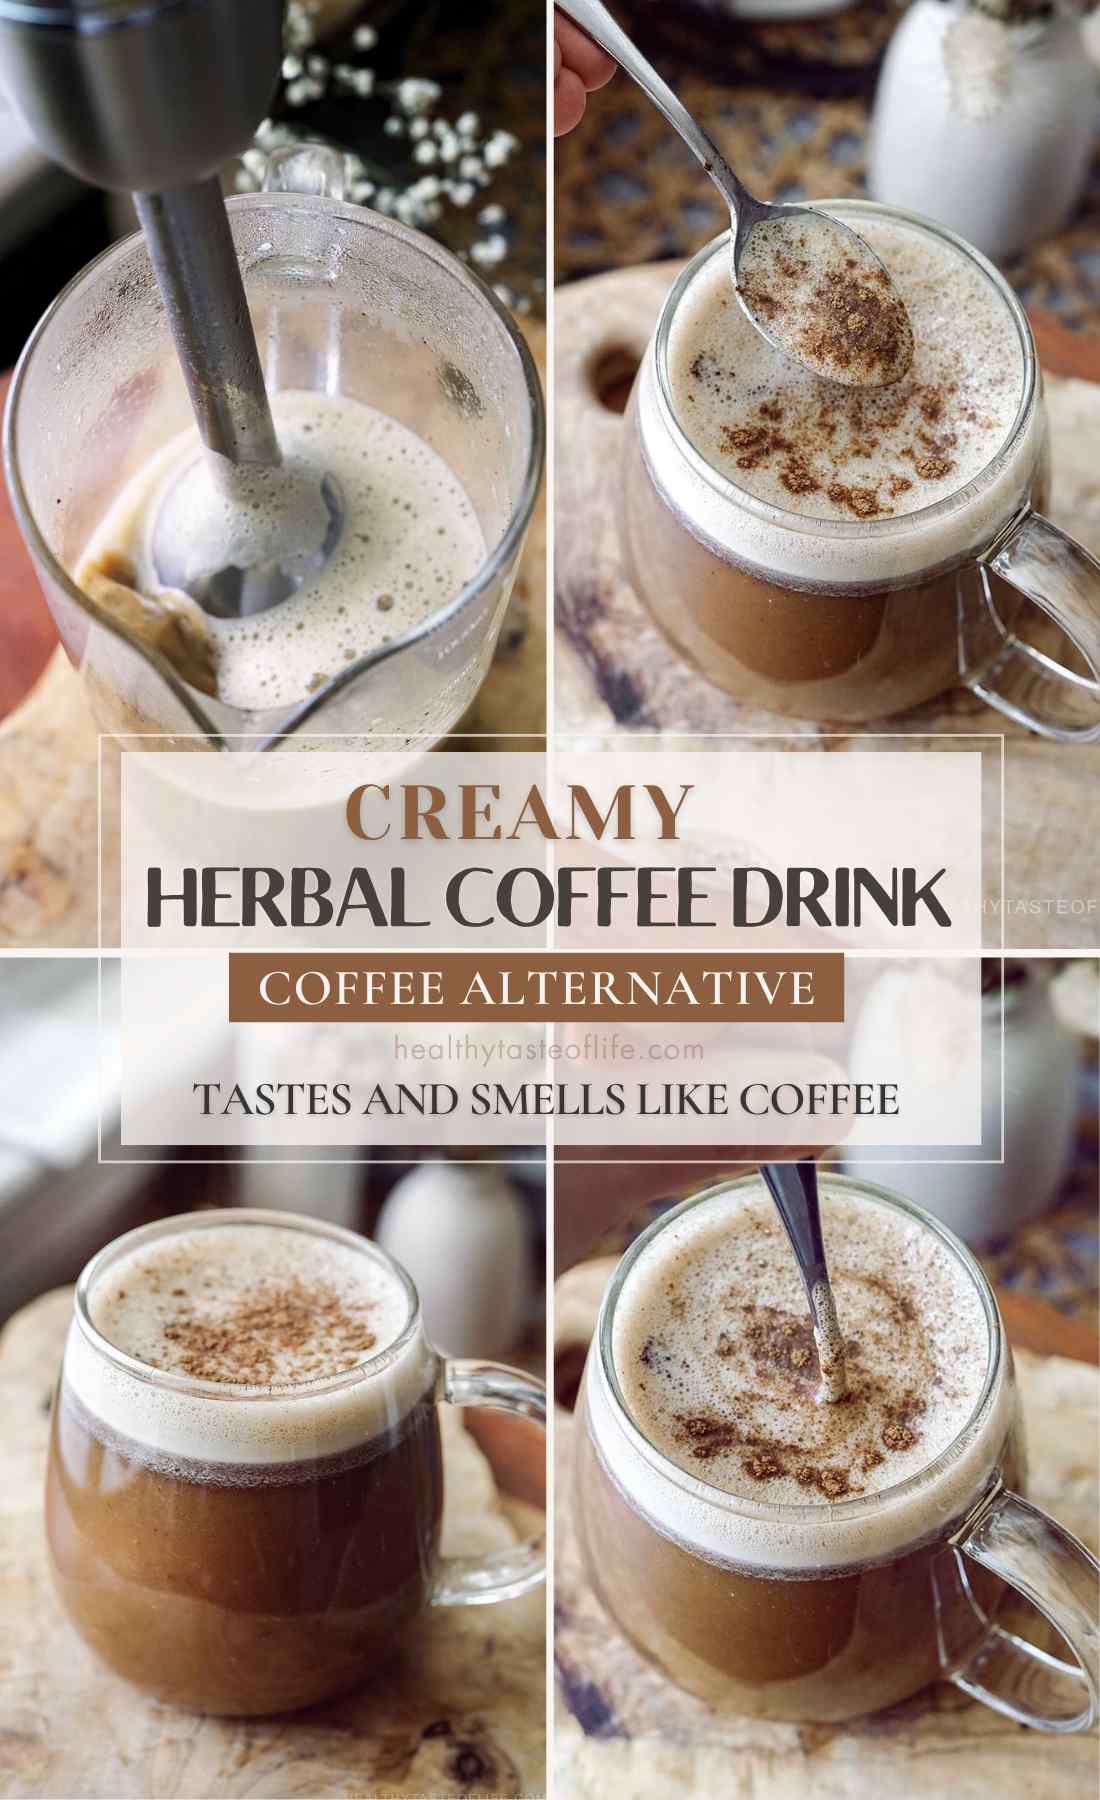 This creamy herbal coffee drink is packed with rich caramel flavors and health perks. This recipe is easy to make and can be enjoyed hot or chilled /over ice. Or add some hot cream and trasnsform into a foamy latte. Brew it strong and let it cool for a refreshing iced coffee for those hot days. Give this dairy-free and gluten-free herbal coffee alternative a go and enjoy the unique blend that not only tastes deliciously similar to coffee but also offers a nice blend of sweetness, flavor and wellness.